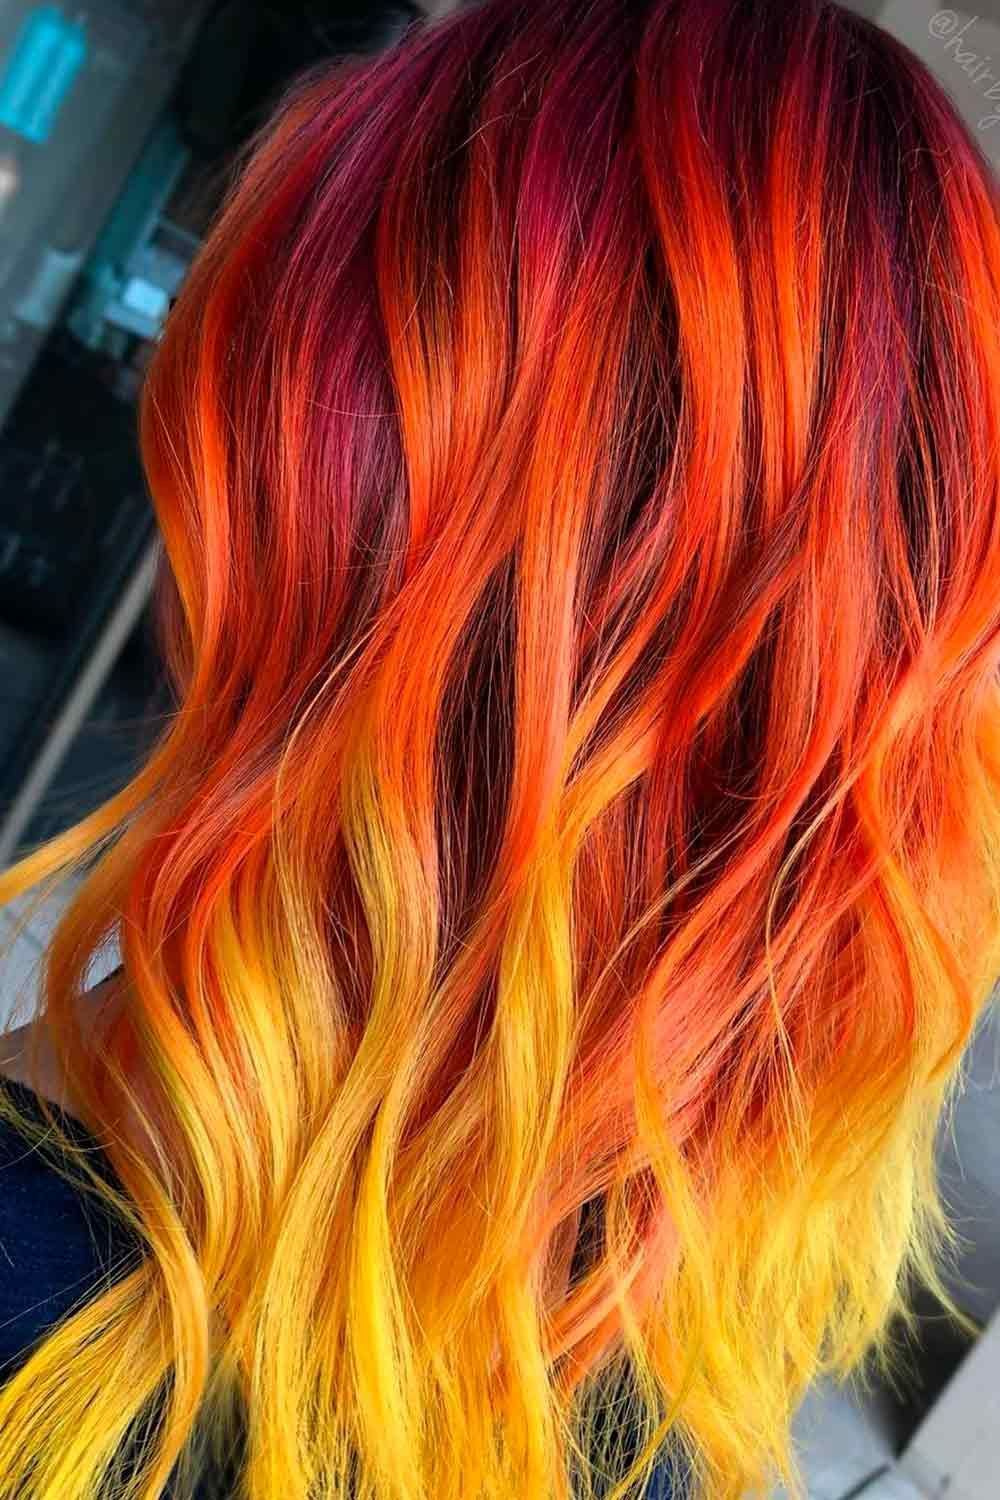 Sunset Ombre hairstyles